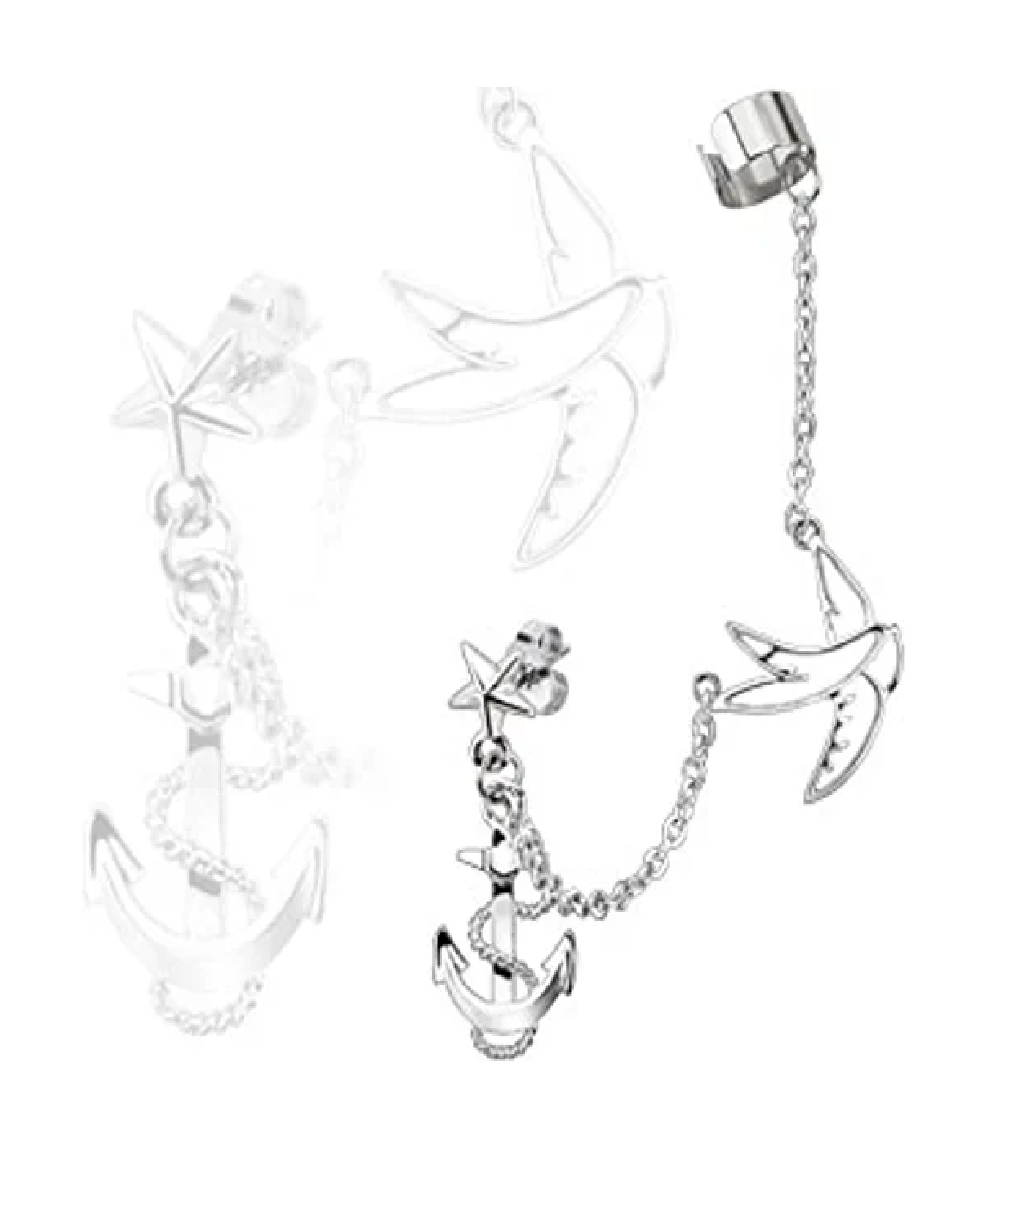 Surgical Steel Star Stud Chain Earring with Swallow and Anchor Dangles Ear Cuff - Impulse Piercings